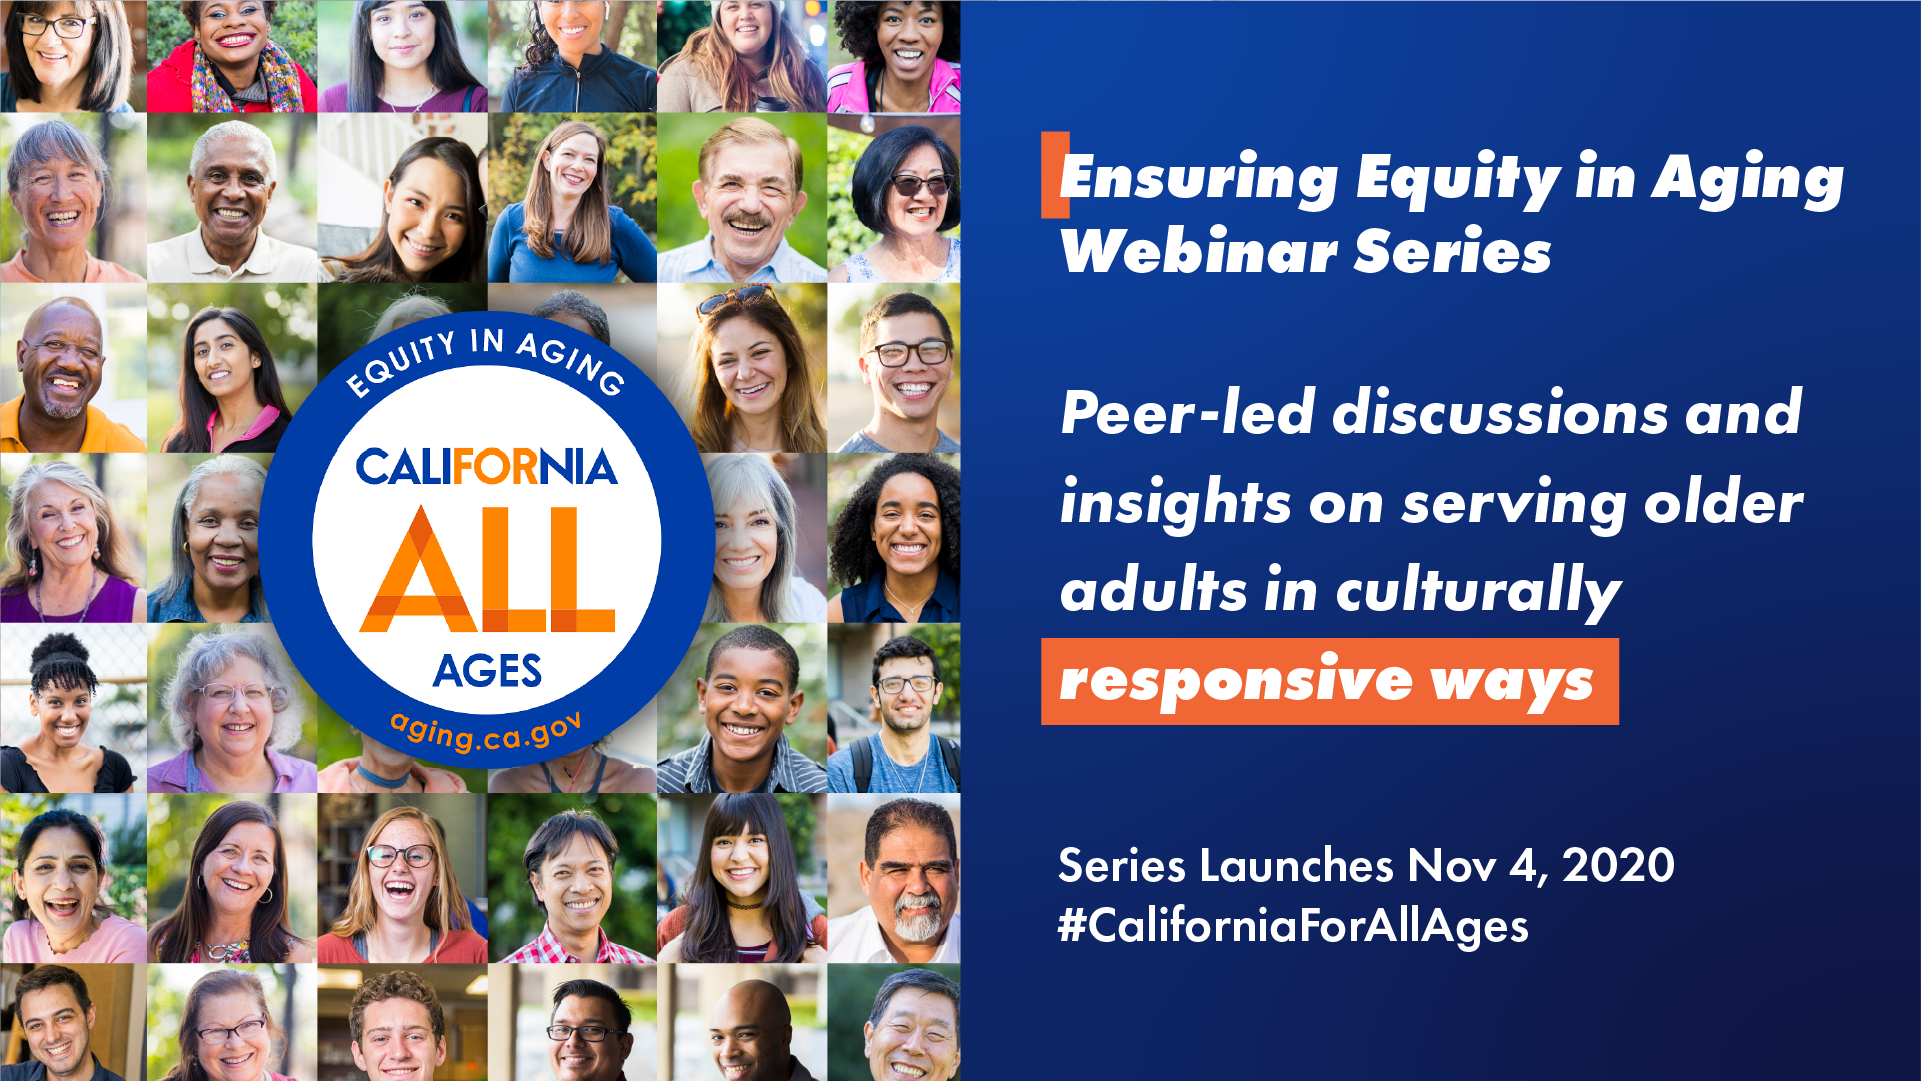 Ensuring equity in aging webinar series. Peer-led discussions and insights on serving older adults in culturally responsive ways. Series launches Nov 4, 2020 #CaliforniaForAllAges